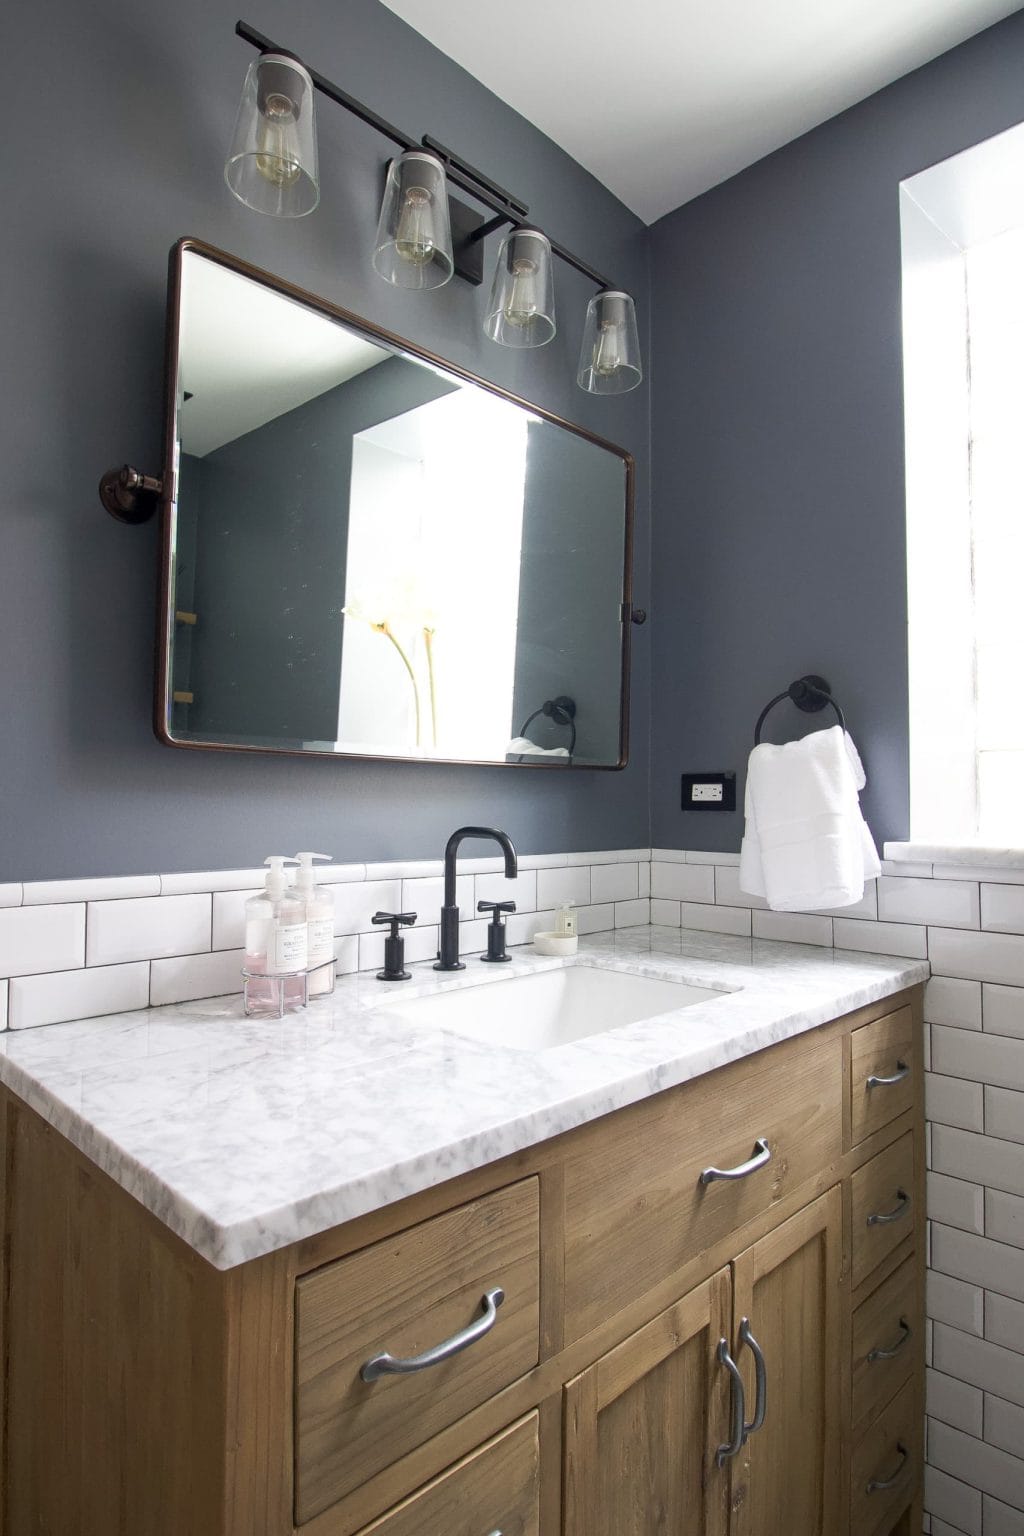 Bathroom renovation - how to survive your first renovation project